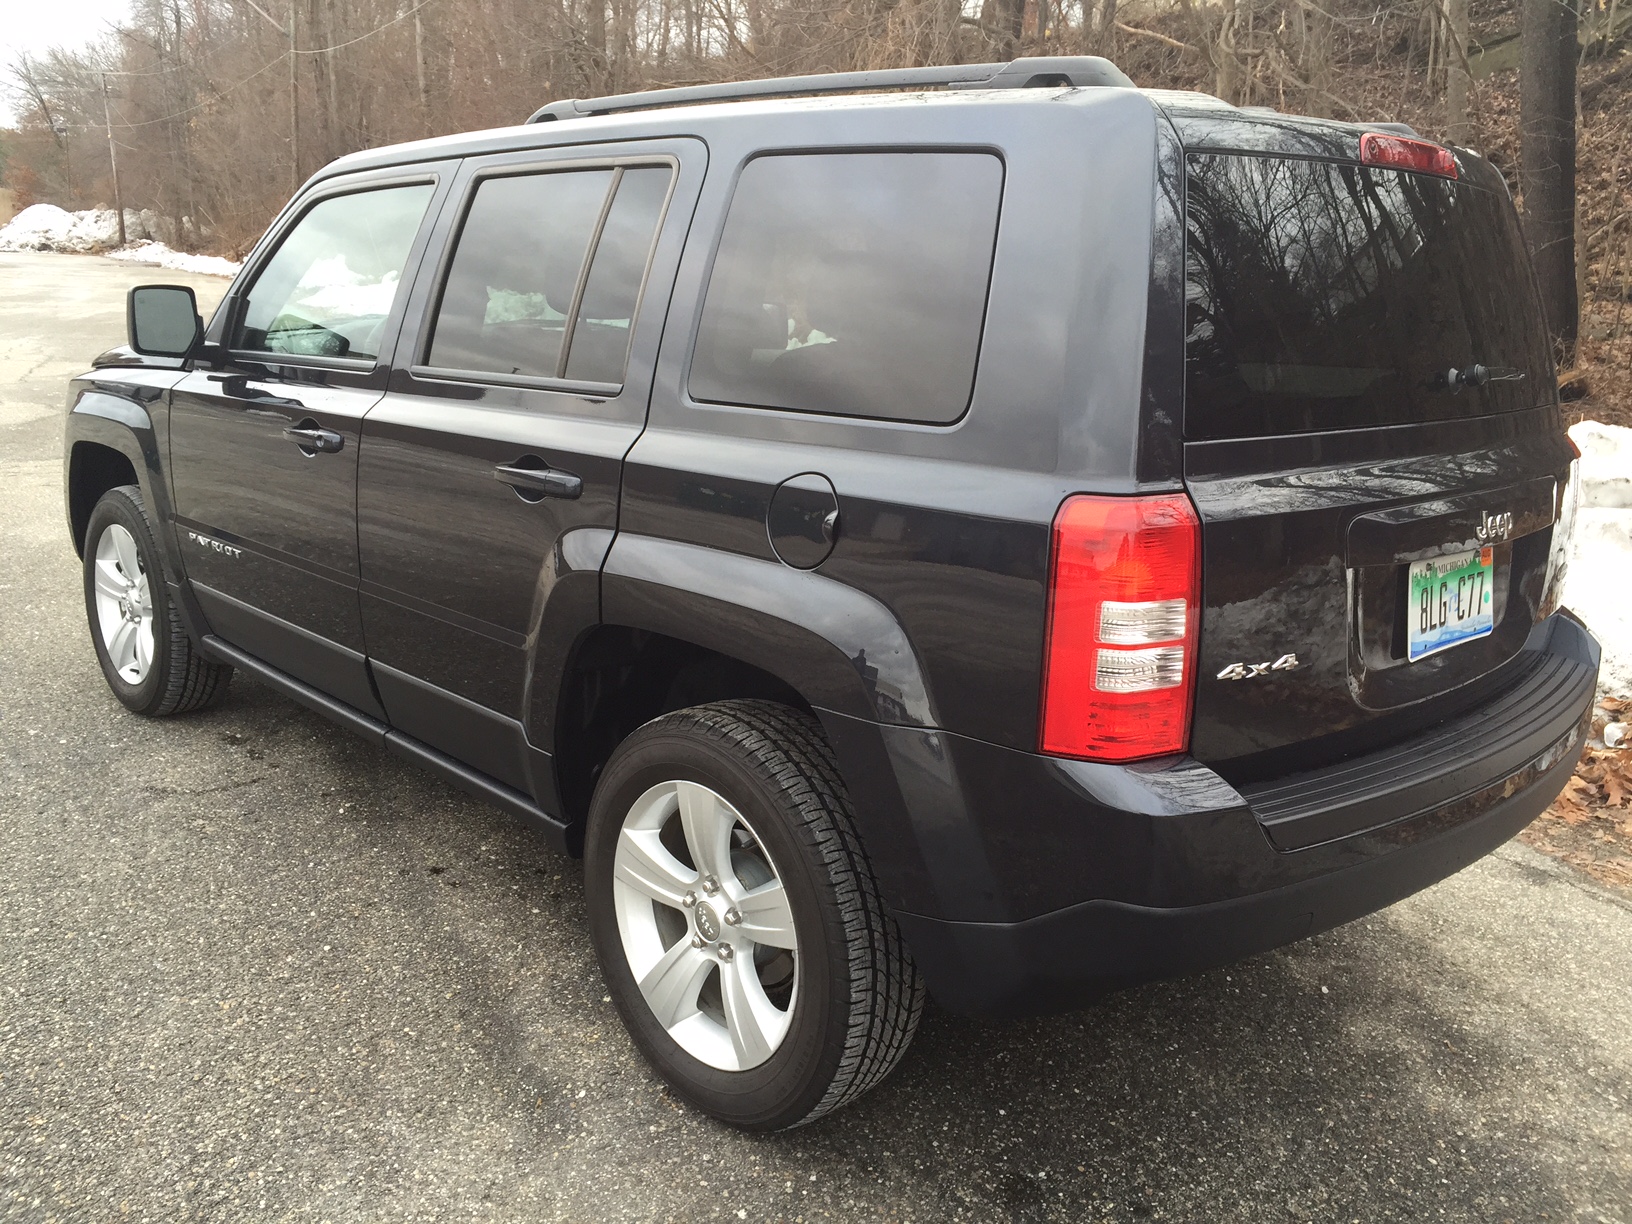 REVIEW: 2014 Jeep Patriot Is Classic Jeep Styling at a Great Price -  BestRide